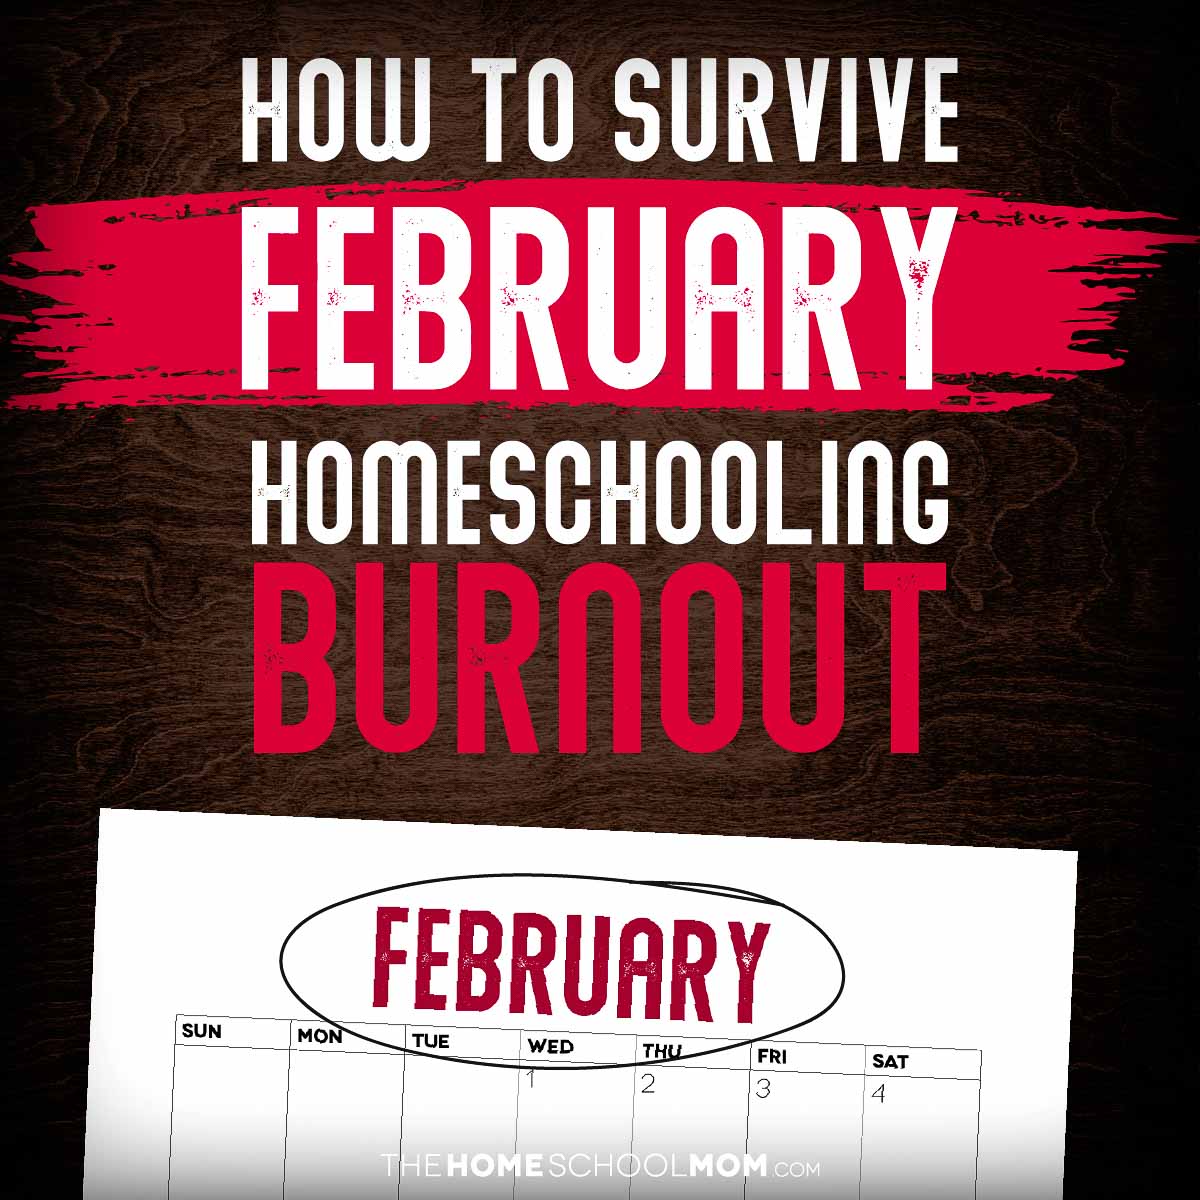 How to Survive February Homeschooling Burnout